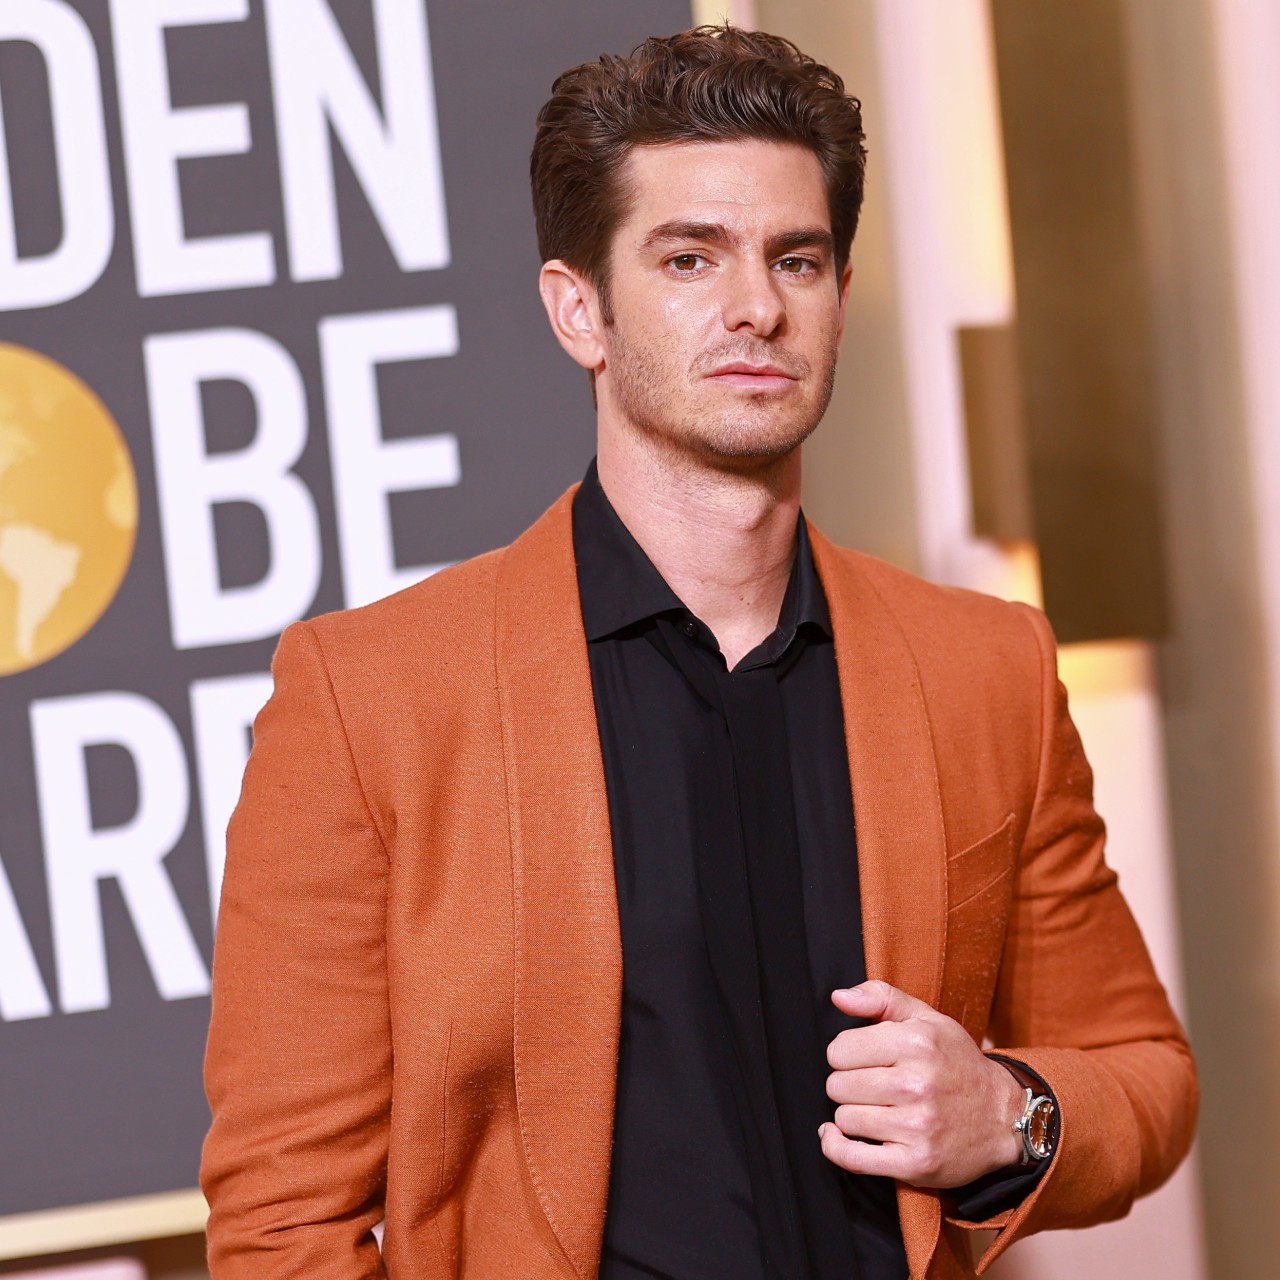  Andrew Garfield and Amelia Dimoldenberg got super flirty on the red carpet, and now people want them to get married 